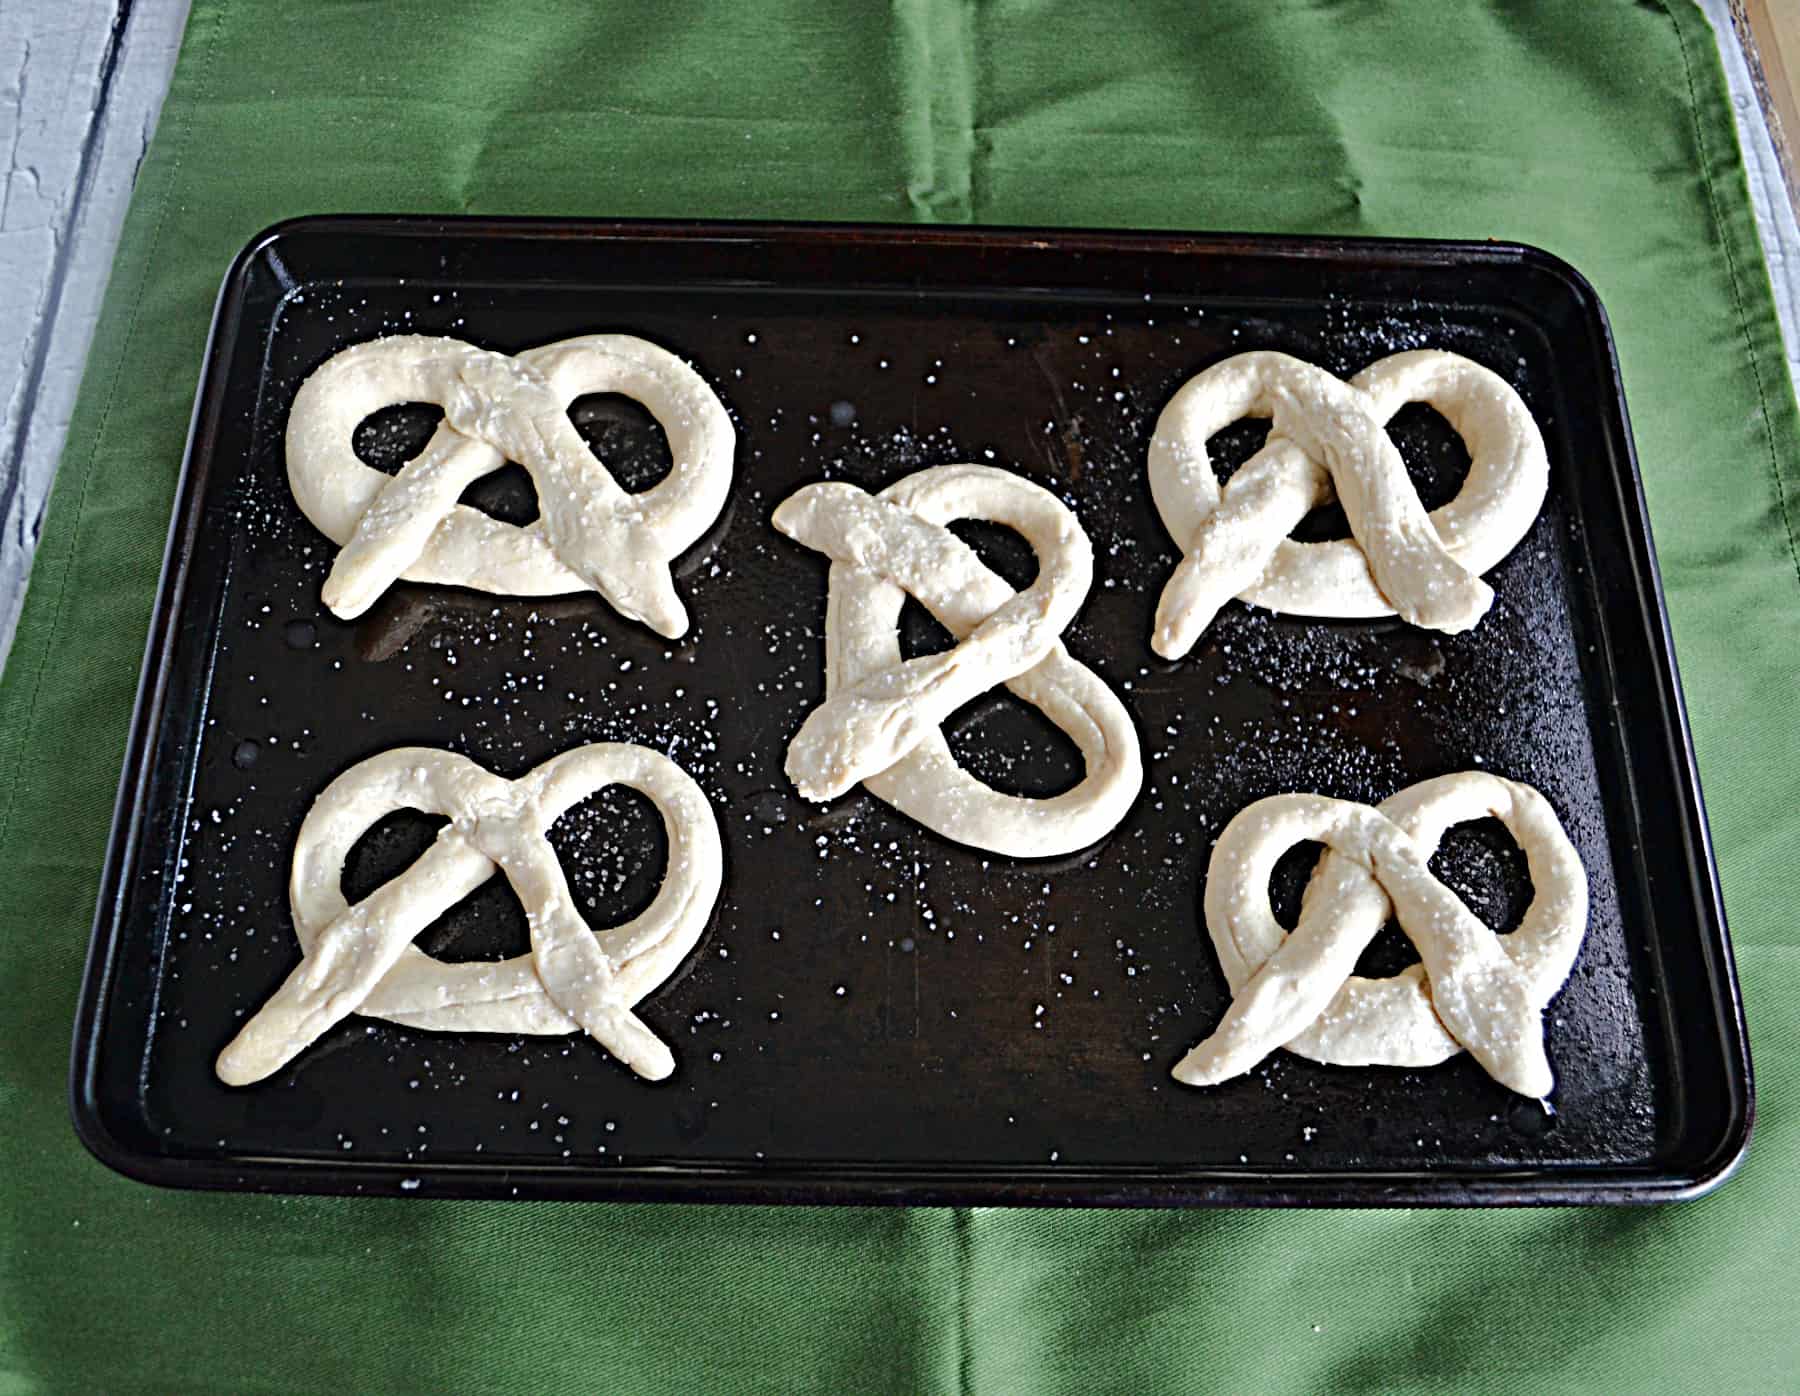 A baking pan with five uncooked pretzels on it.